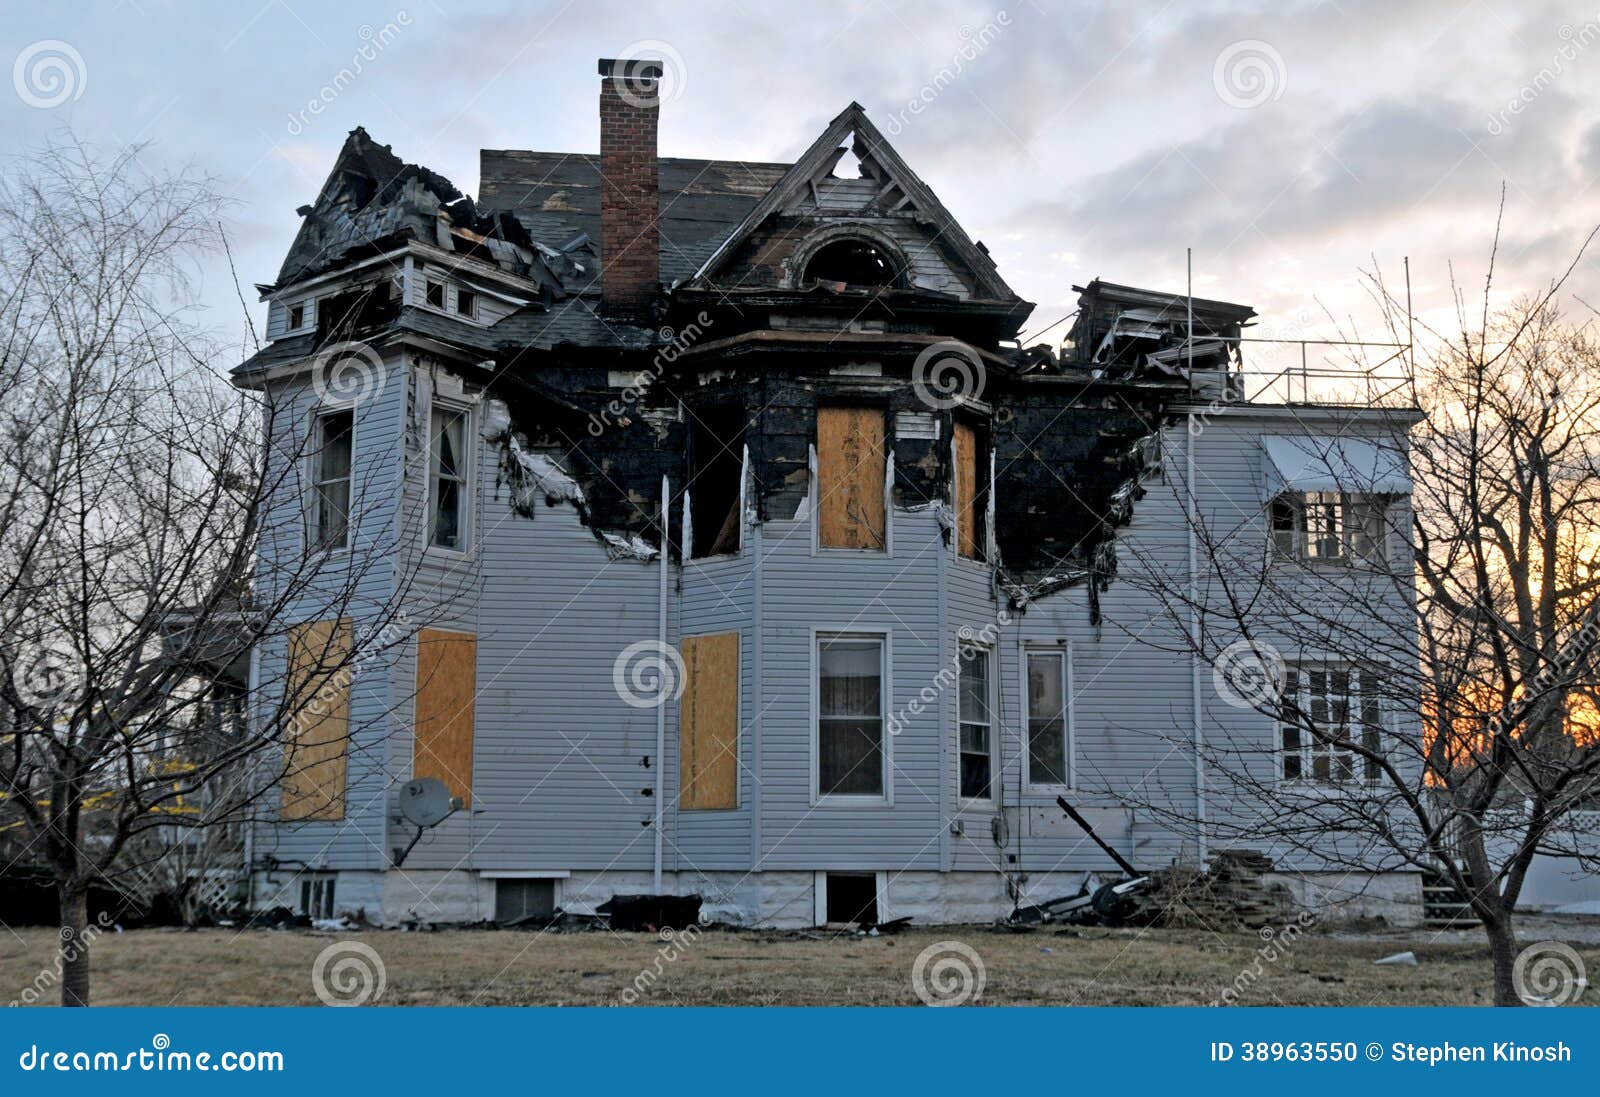 fire damage on a victorian home